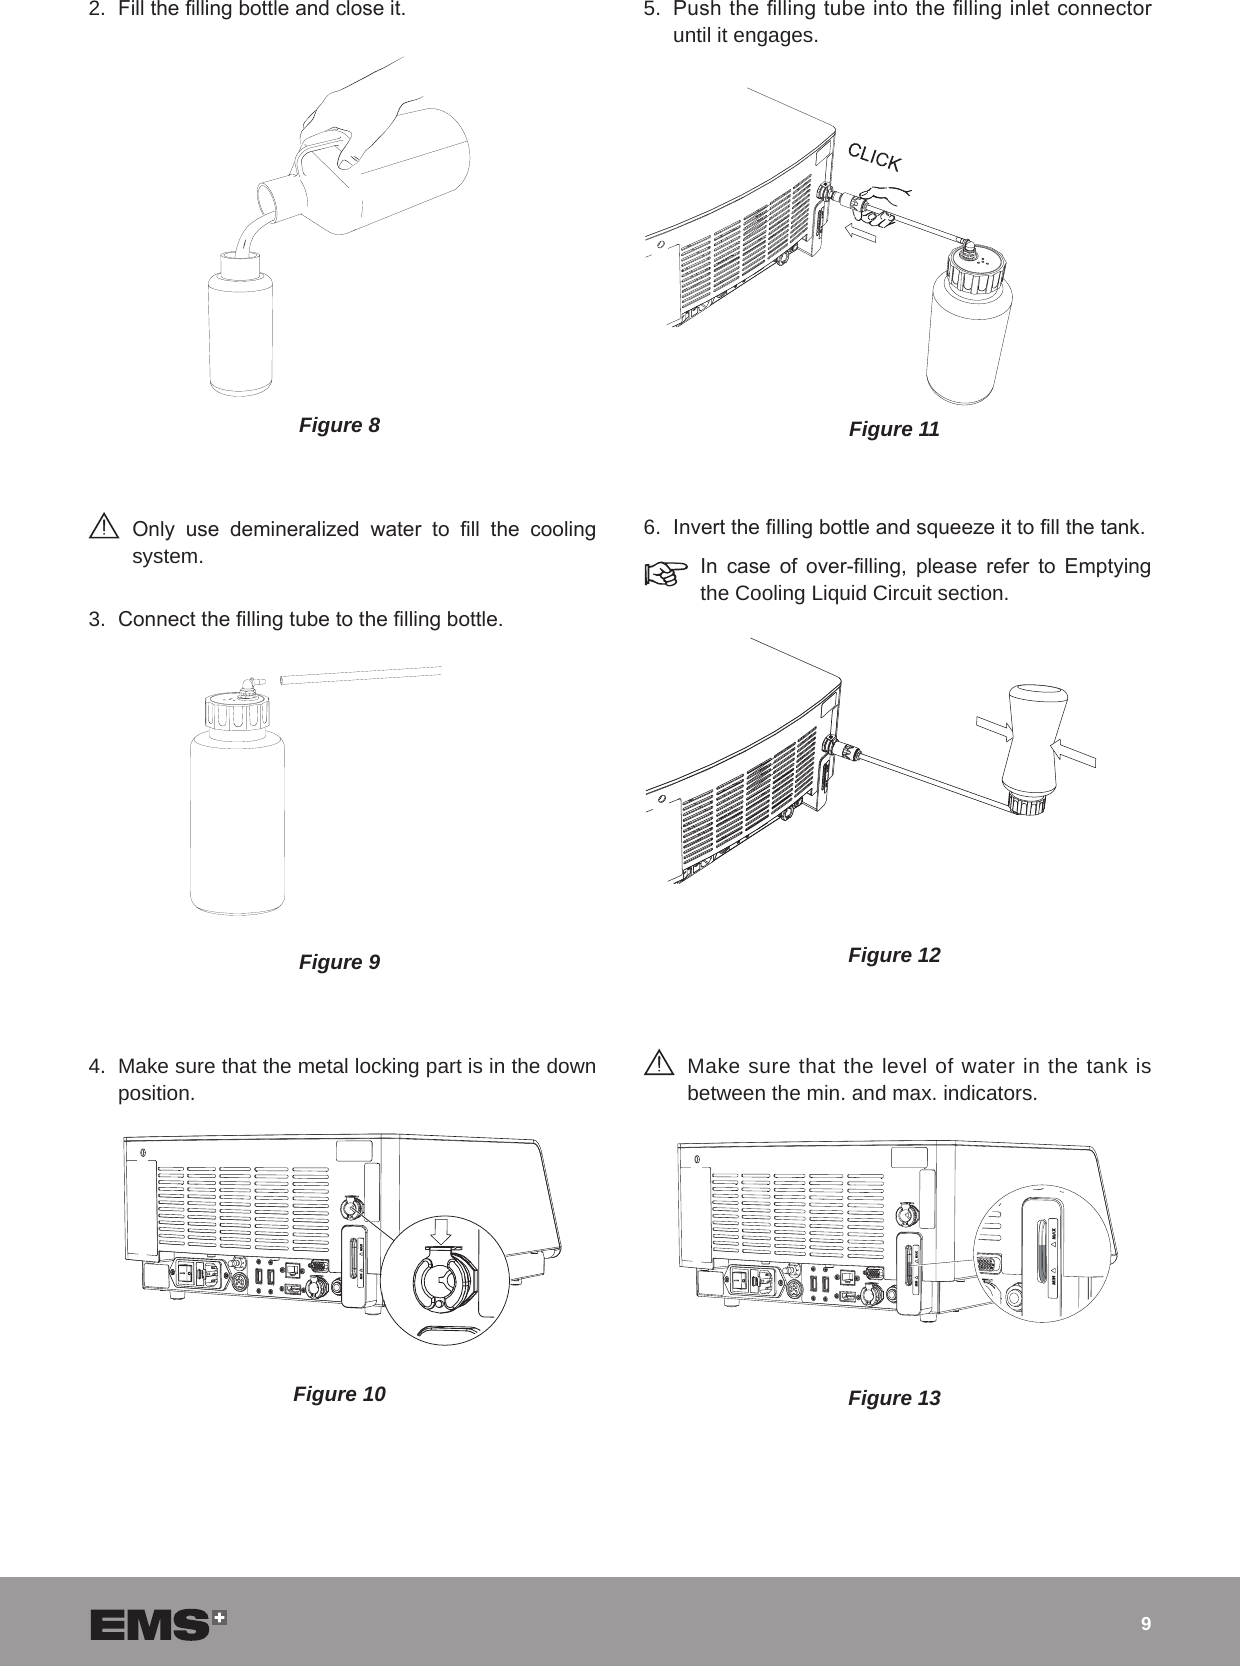 92.  Fill the lling bottle and close it.Figure 8 Only  use  demineralized  water  to  ll  the  cooling system.3.  Connect the lling tube to the lling bottle.Figure 94.  Make sure that the metal locking part is in the down position.Figure 105.  Push the lling tube into the lling inlet connector until it engages. Figure 116.  Invert the lling bottle and squeeze it to ll the tank.In  case  of  over-lling,  please  refer  to  Emptying the Cooling Liquid Circuit section.Figure 12 Make sure that the level of water in the tank is between the min. and max. indicators.Figure 13